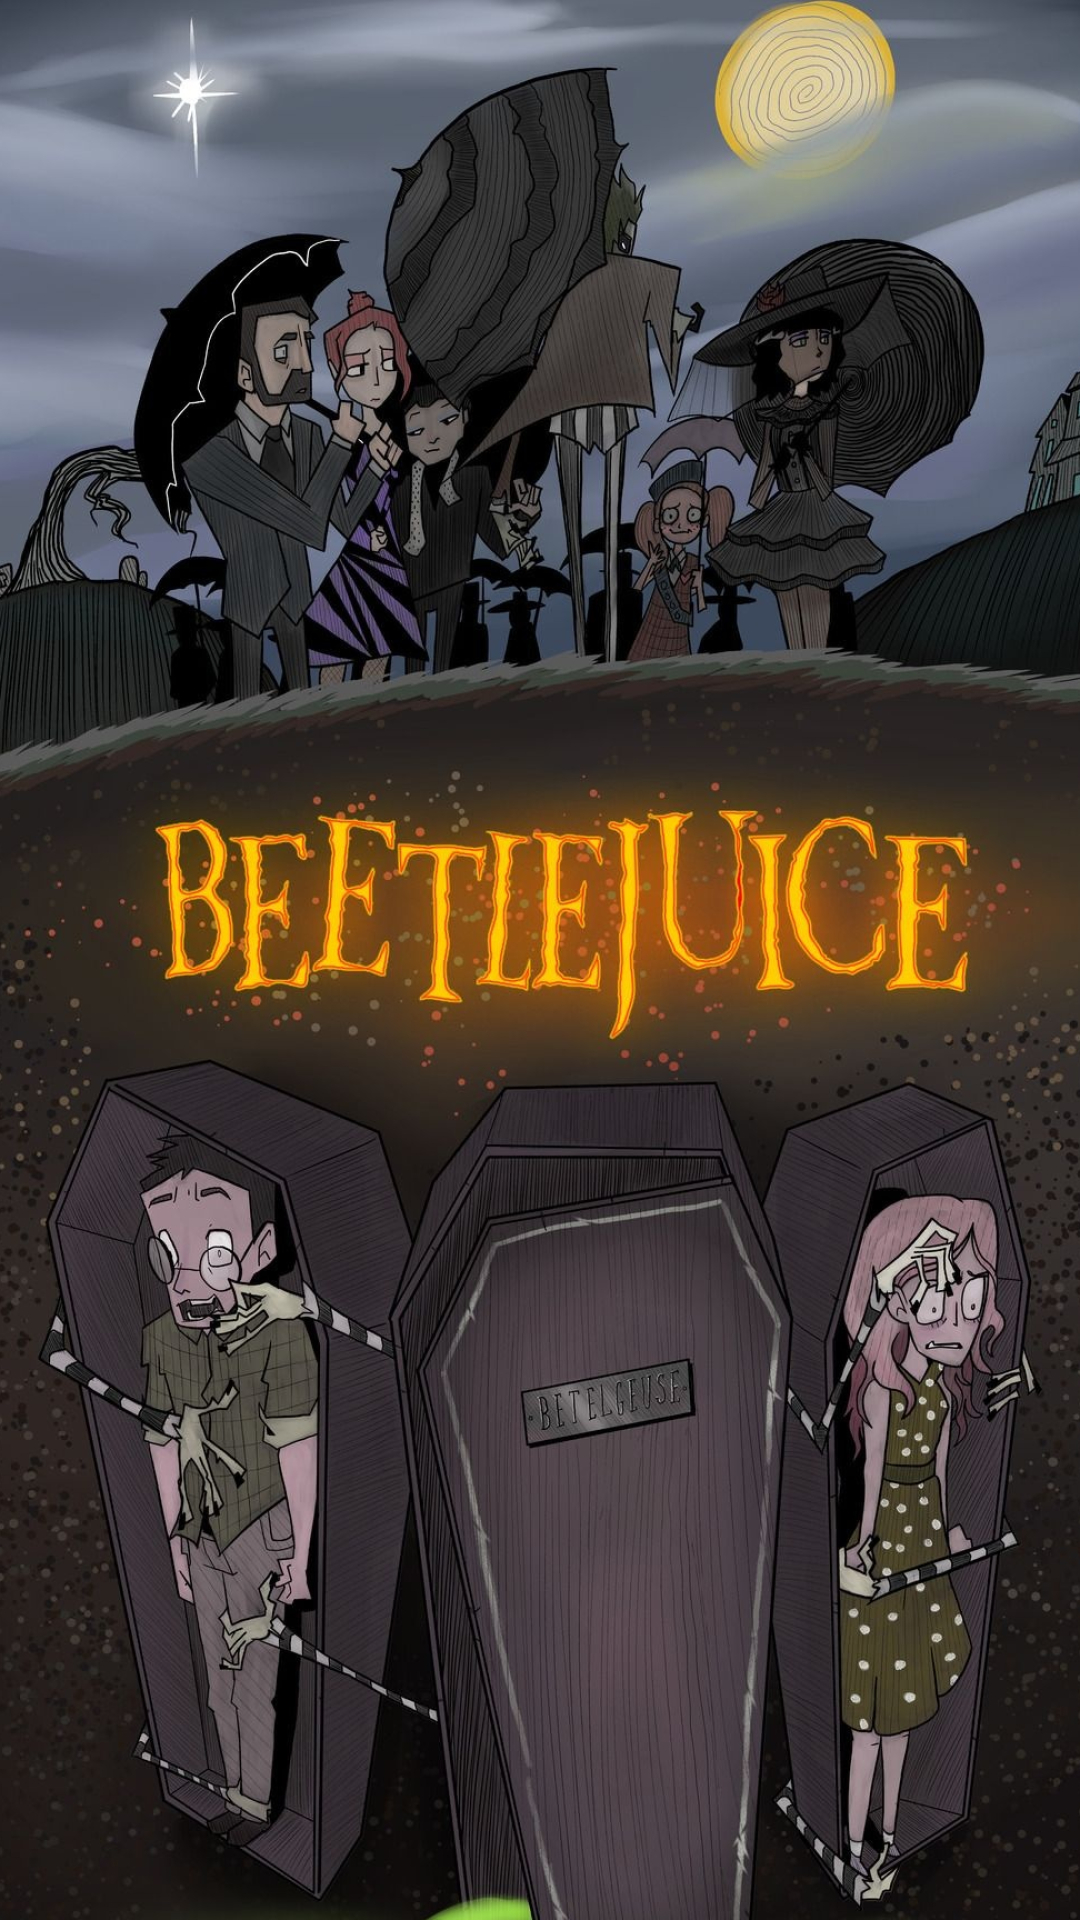 Beetlejuice (Cartoon): One of the first cartoons to air on the Fox Channel's Fox Kids lineup. 1080x1920 Full HD Wallpaper.